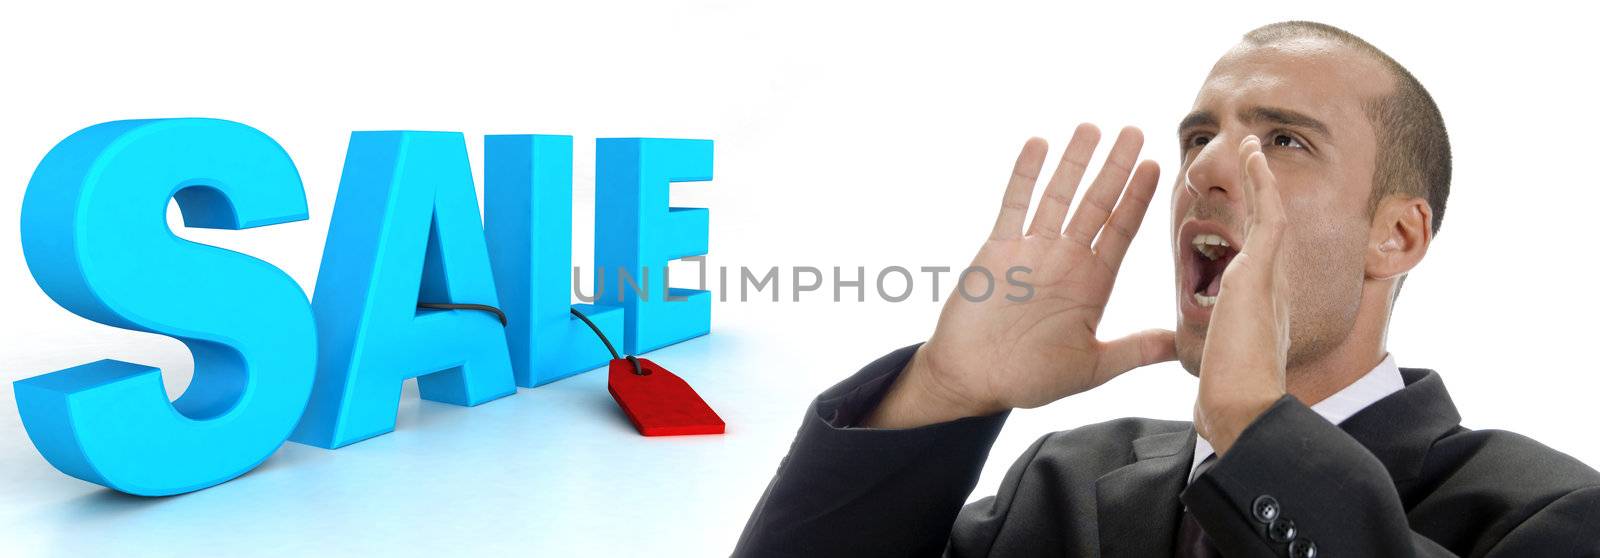 three dimensional sale text with tag and shouting man on an isolated white background